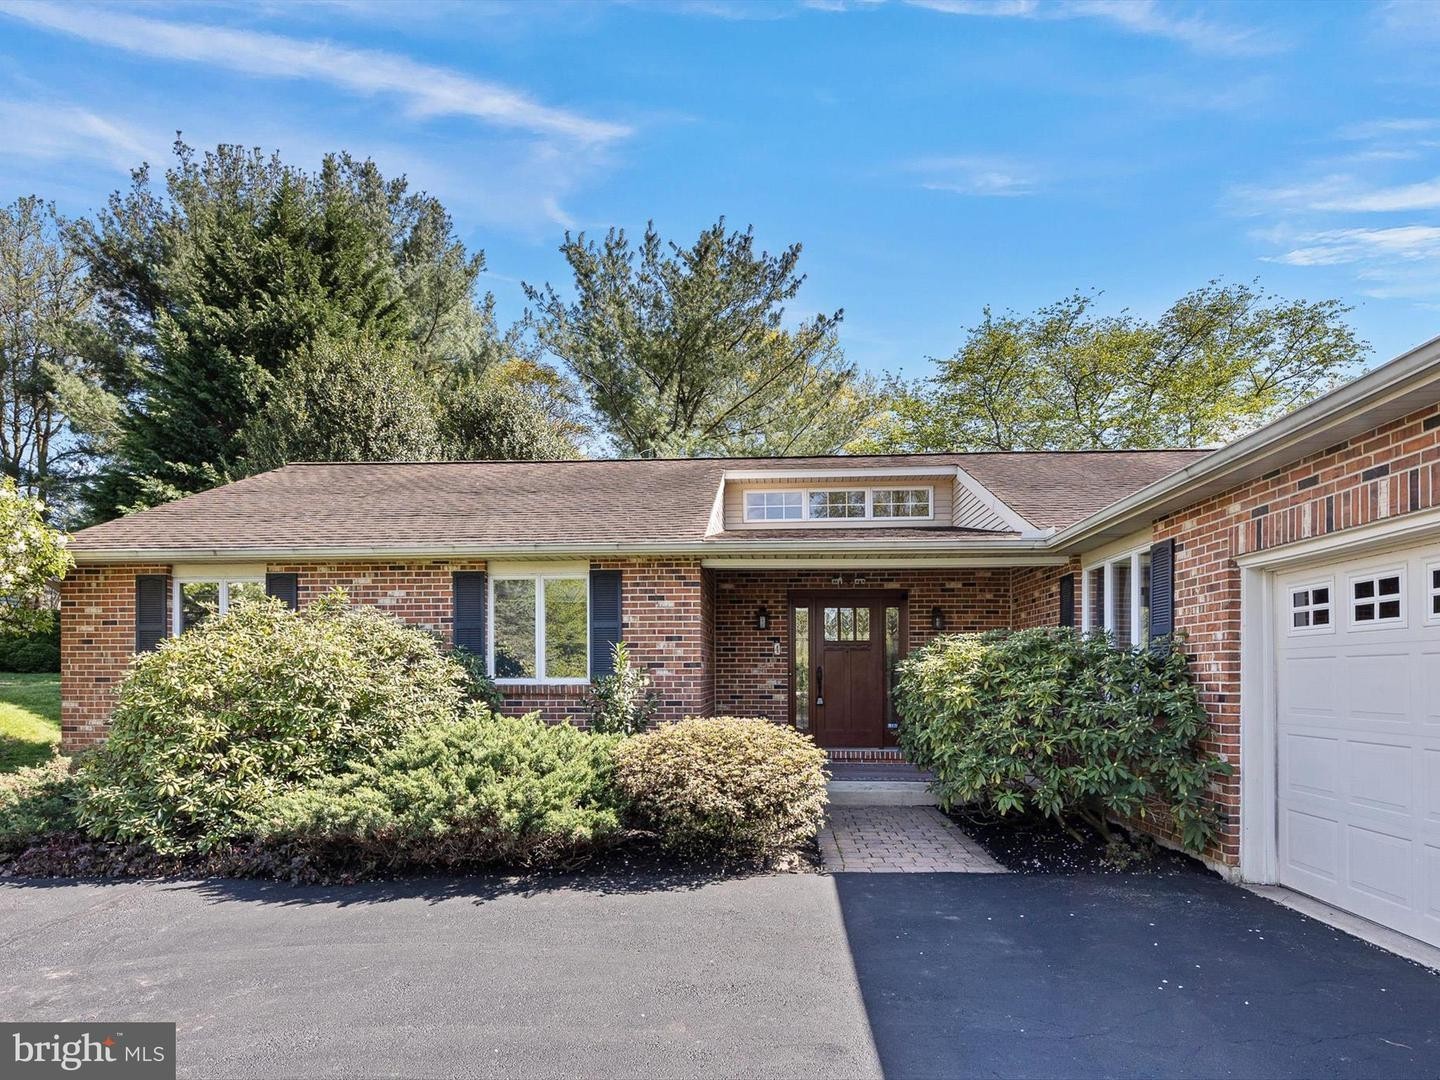 2. 4 Colonial Ct